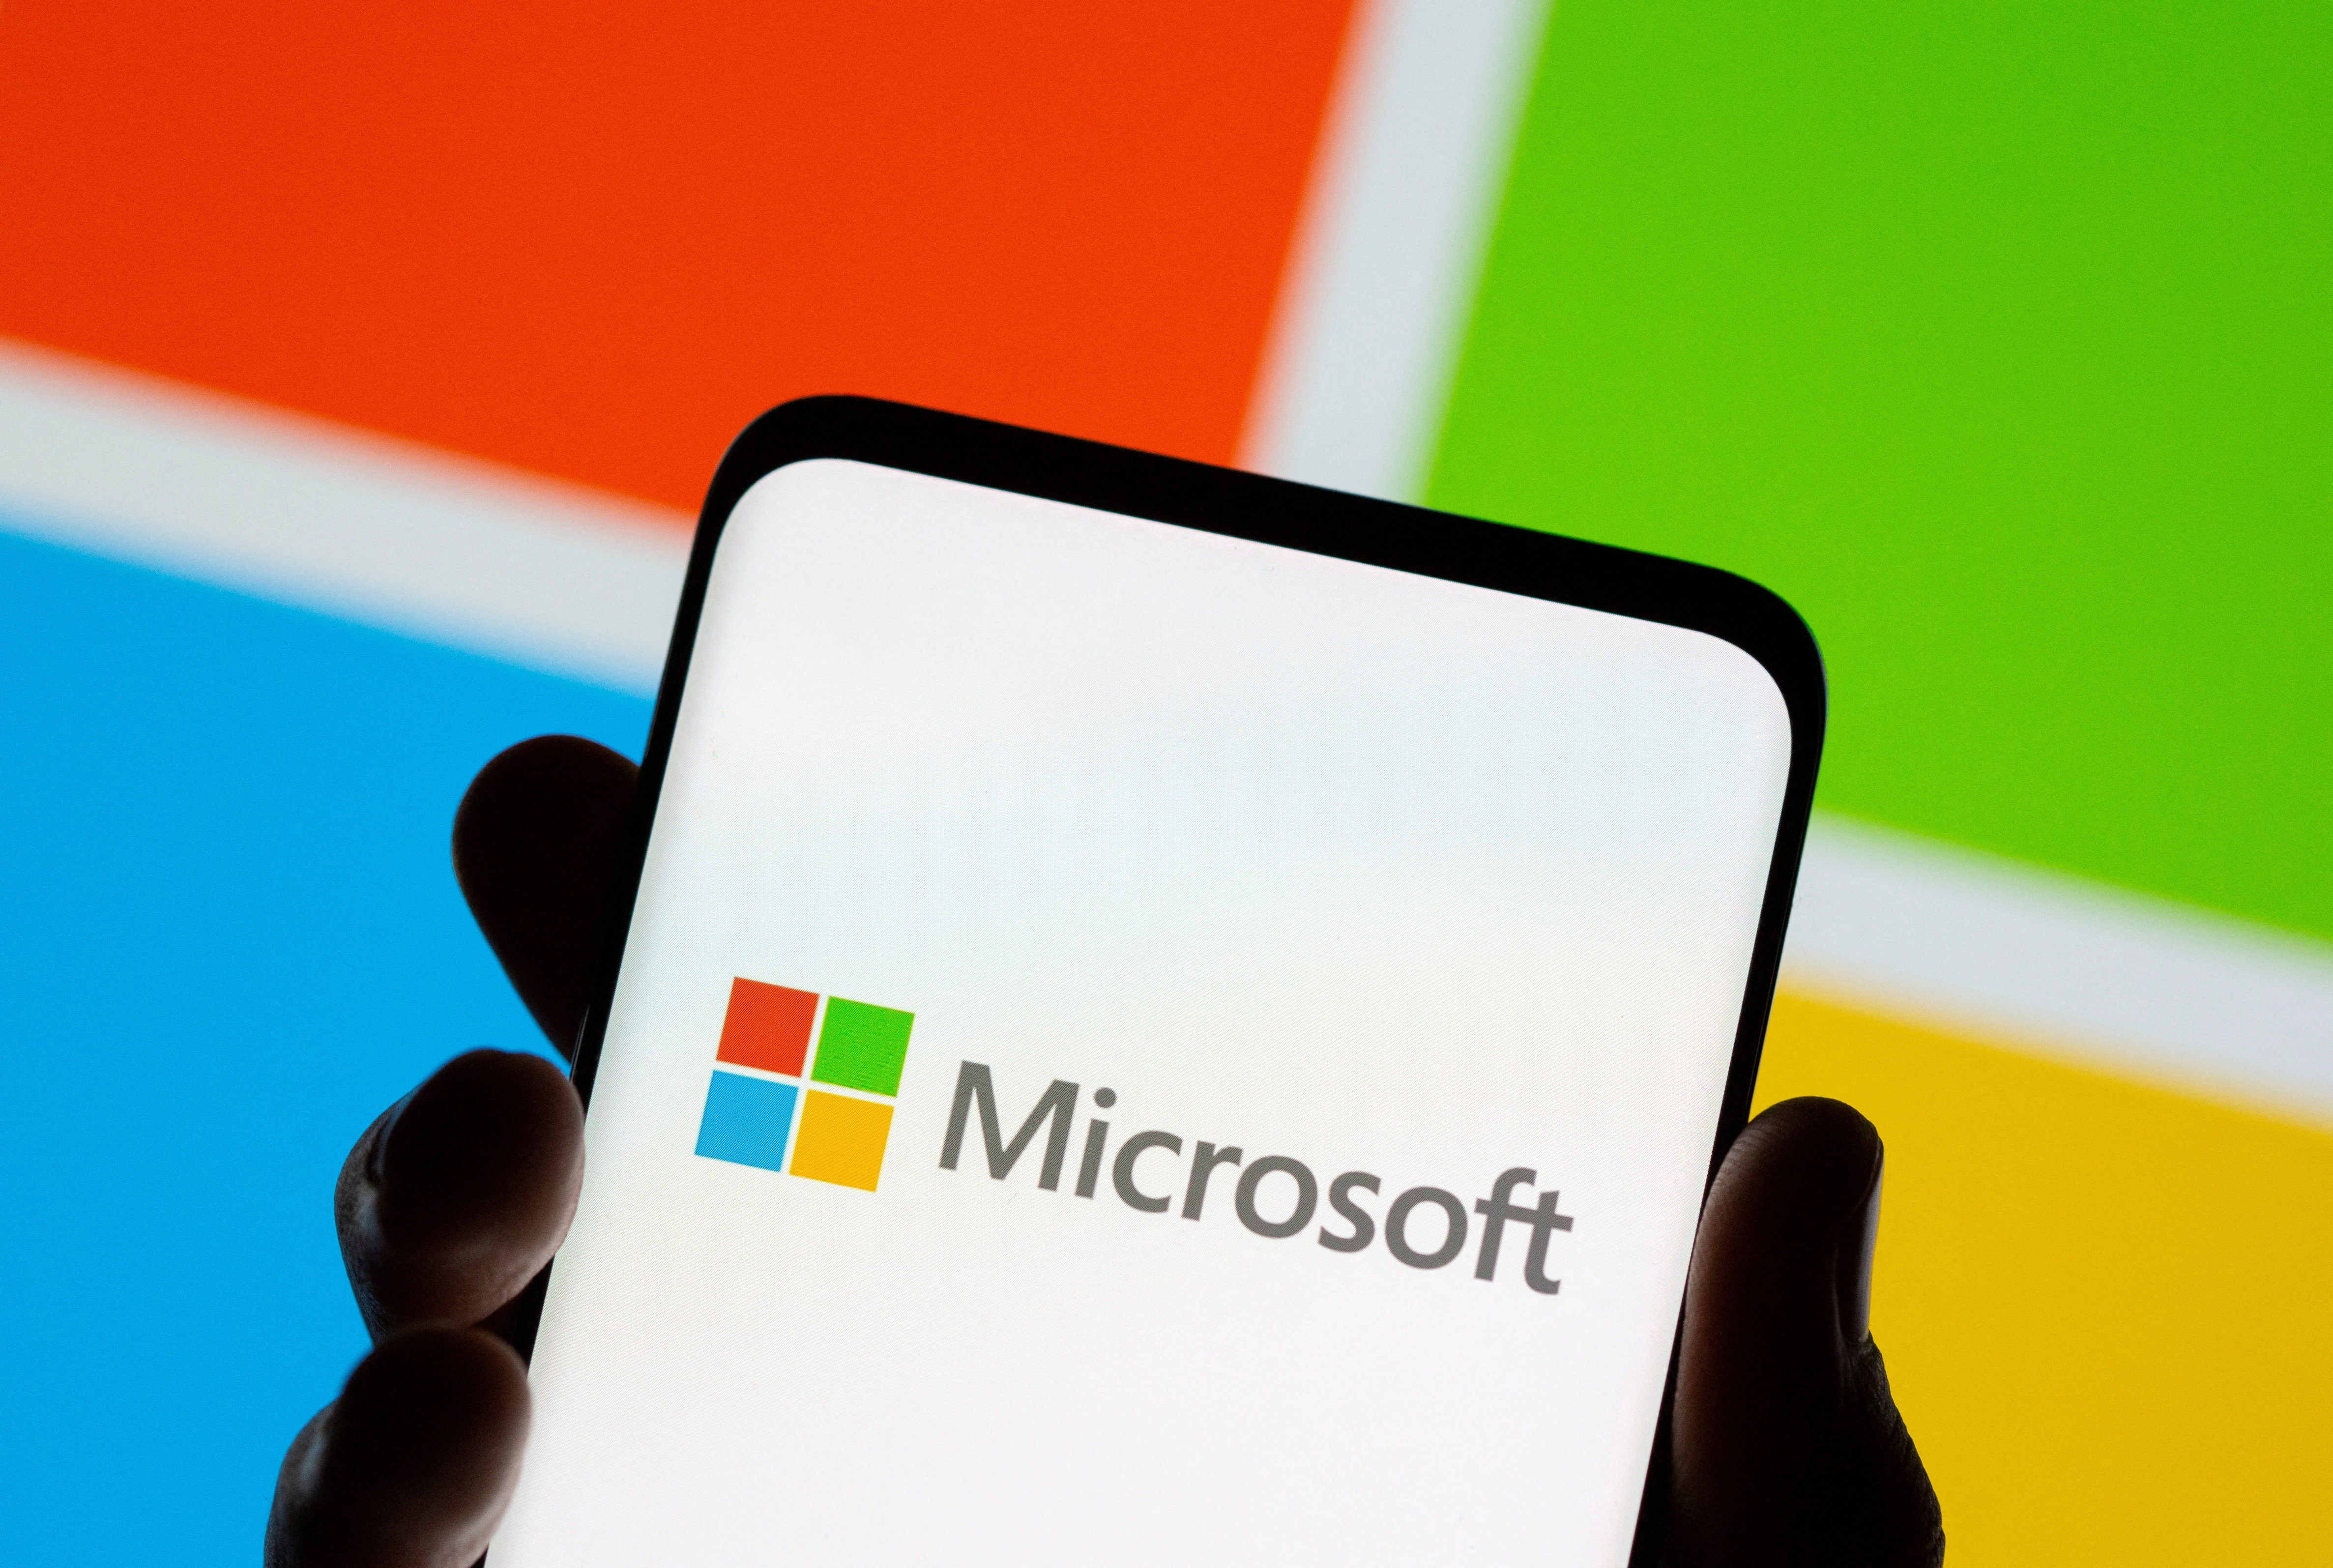 Smartphone is seen in front of Microsoft logo displayed 